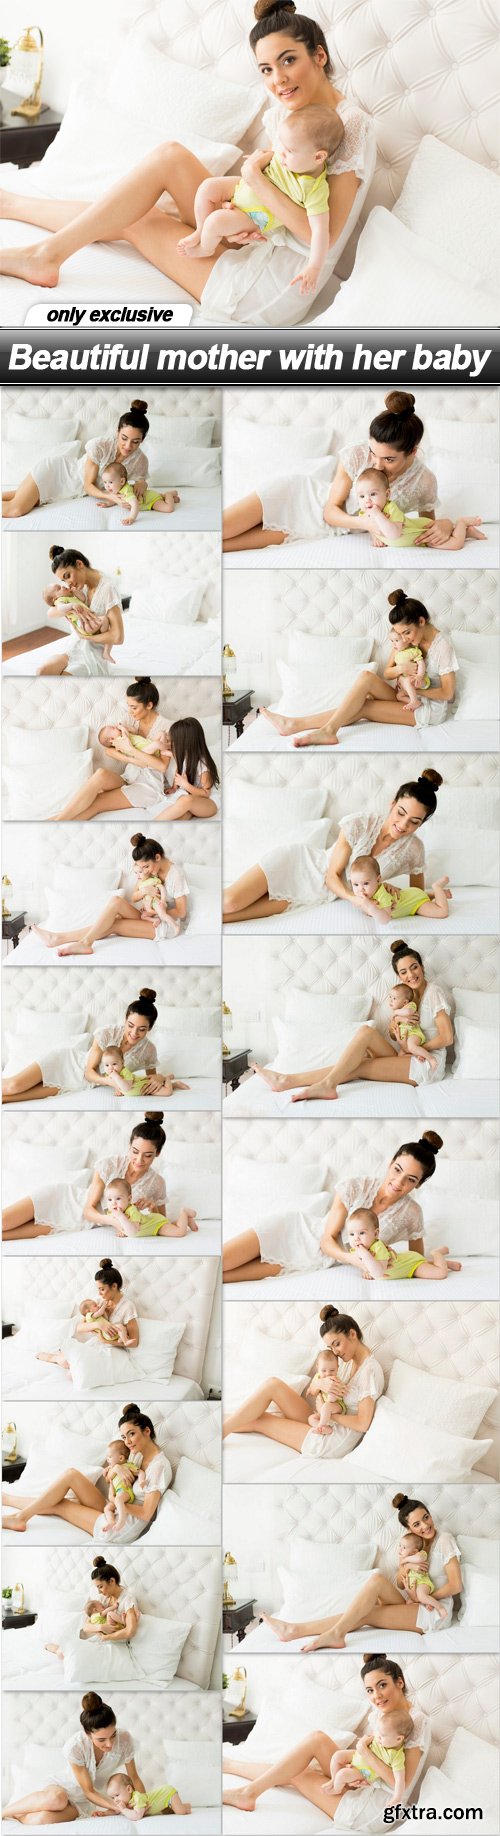 Beautiful mother with her baby - 18 UHQ JPEG